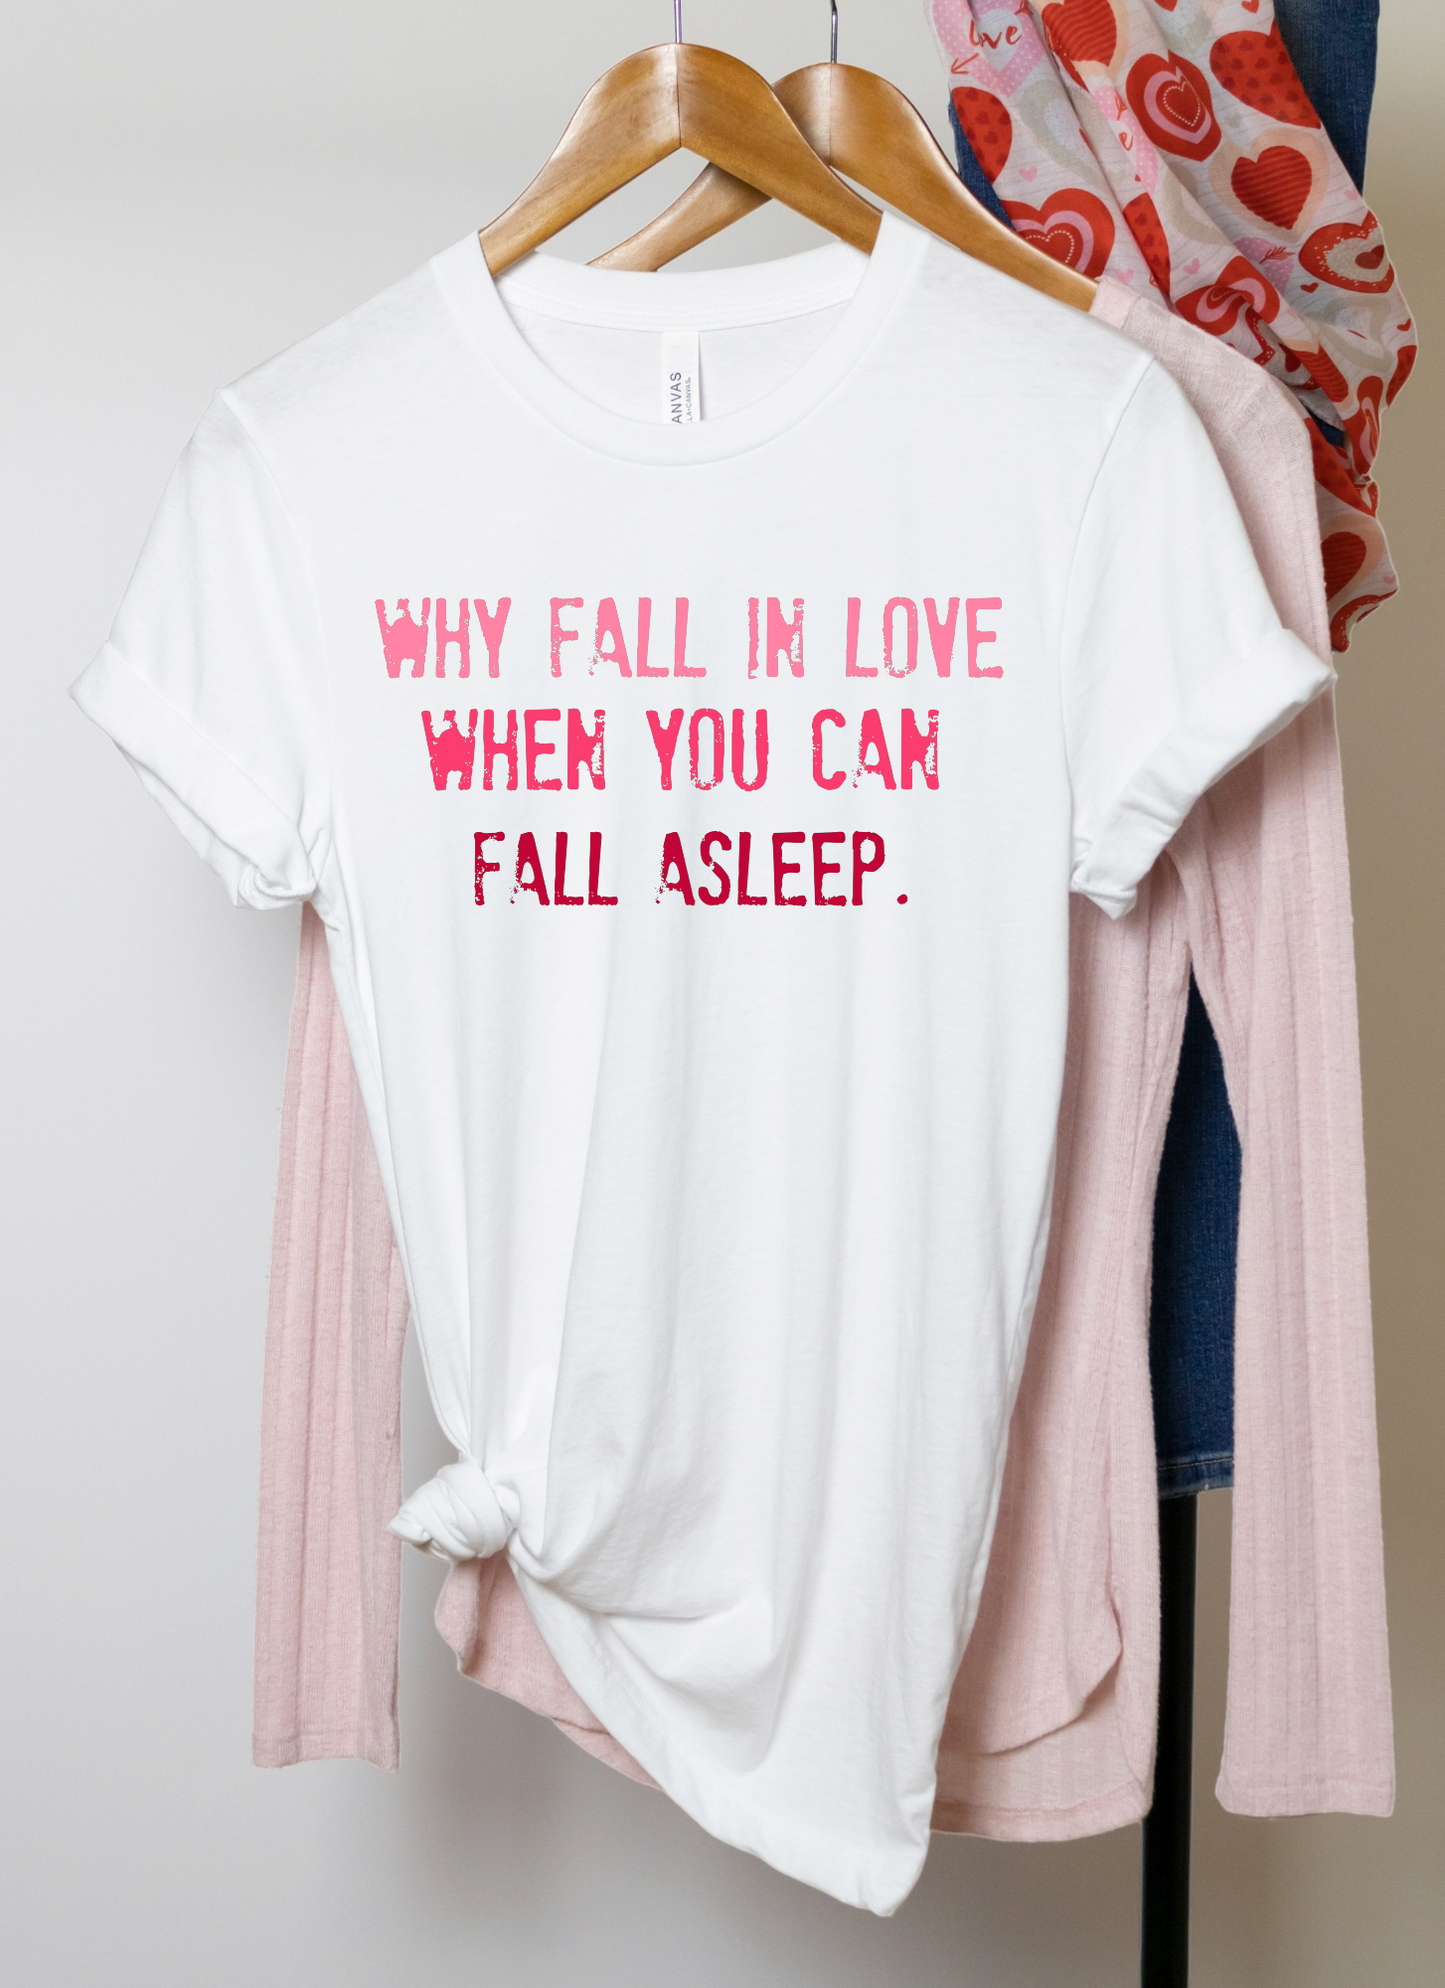 WHY FALL IN LOVE WHEN YOU CAN FALL ASLEEP